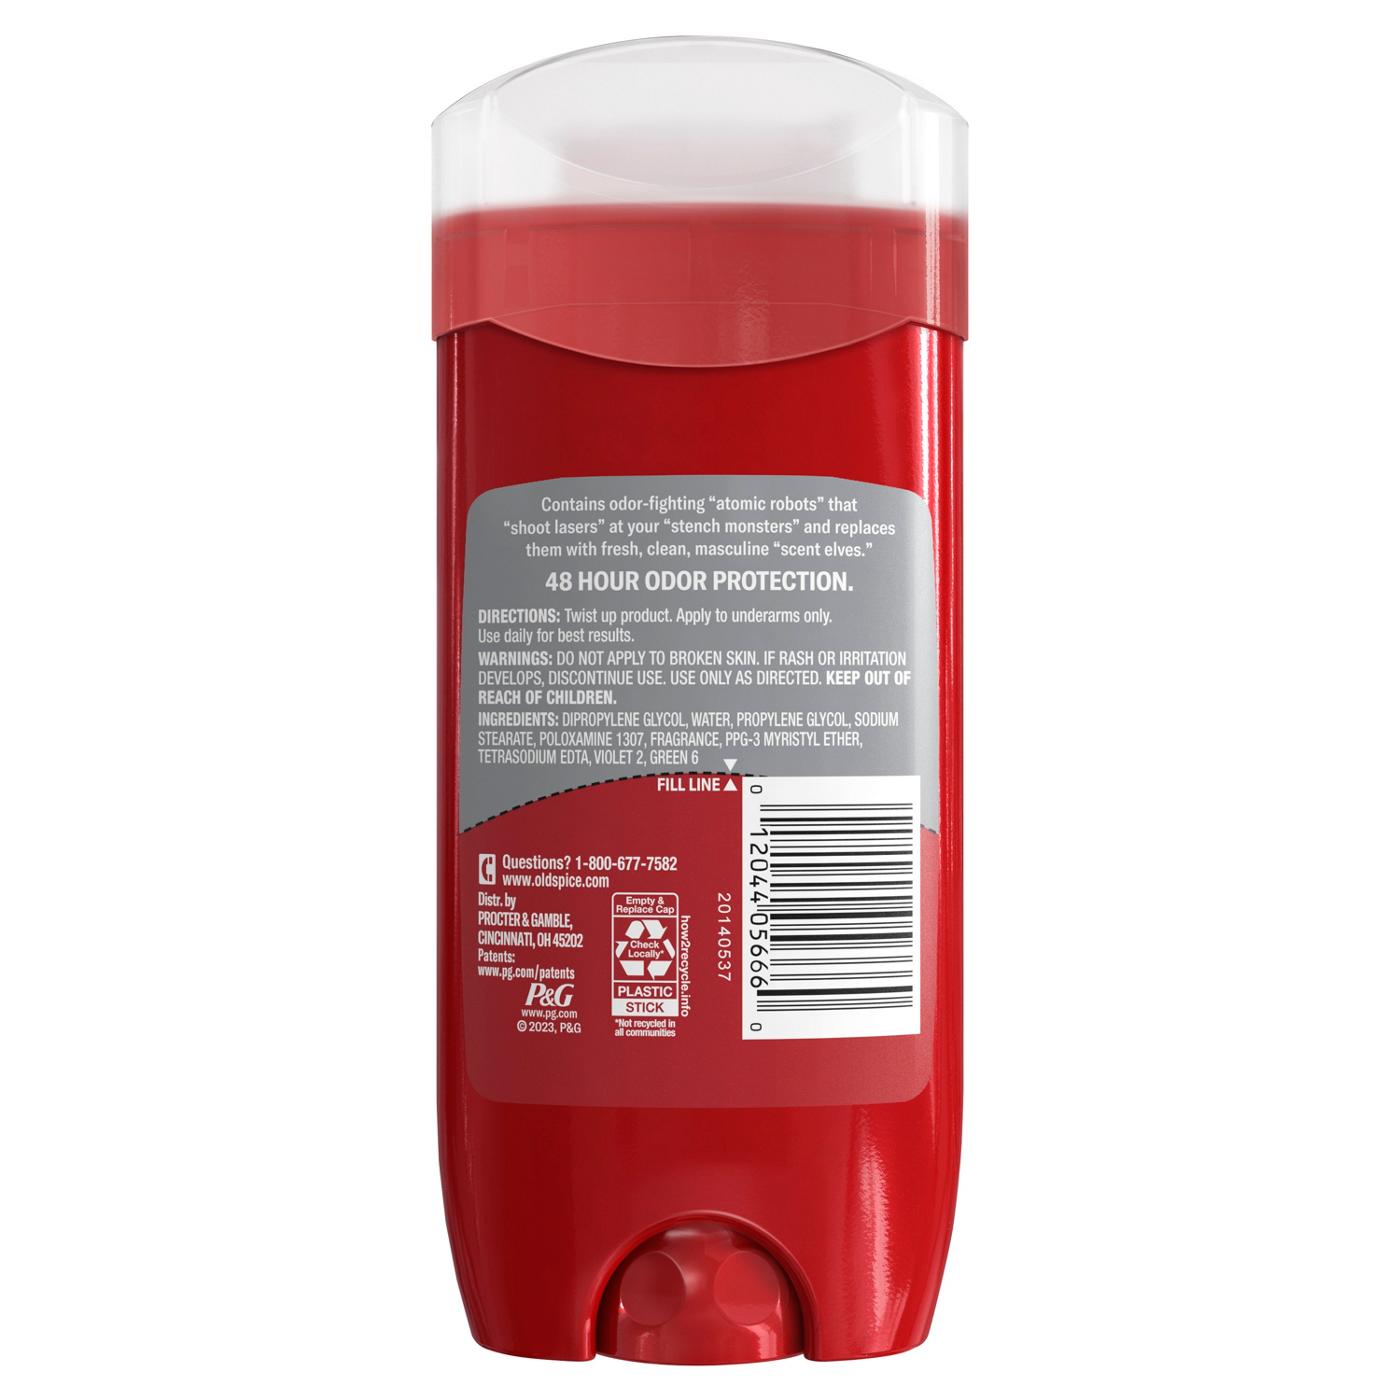 Old Spice Deodorant - Pure Sport; image 2 of 2